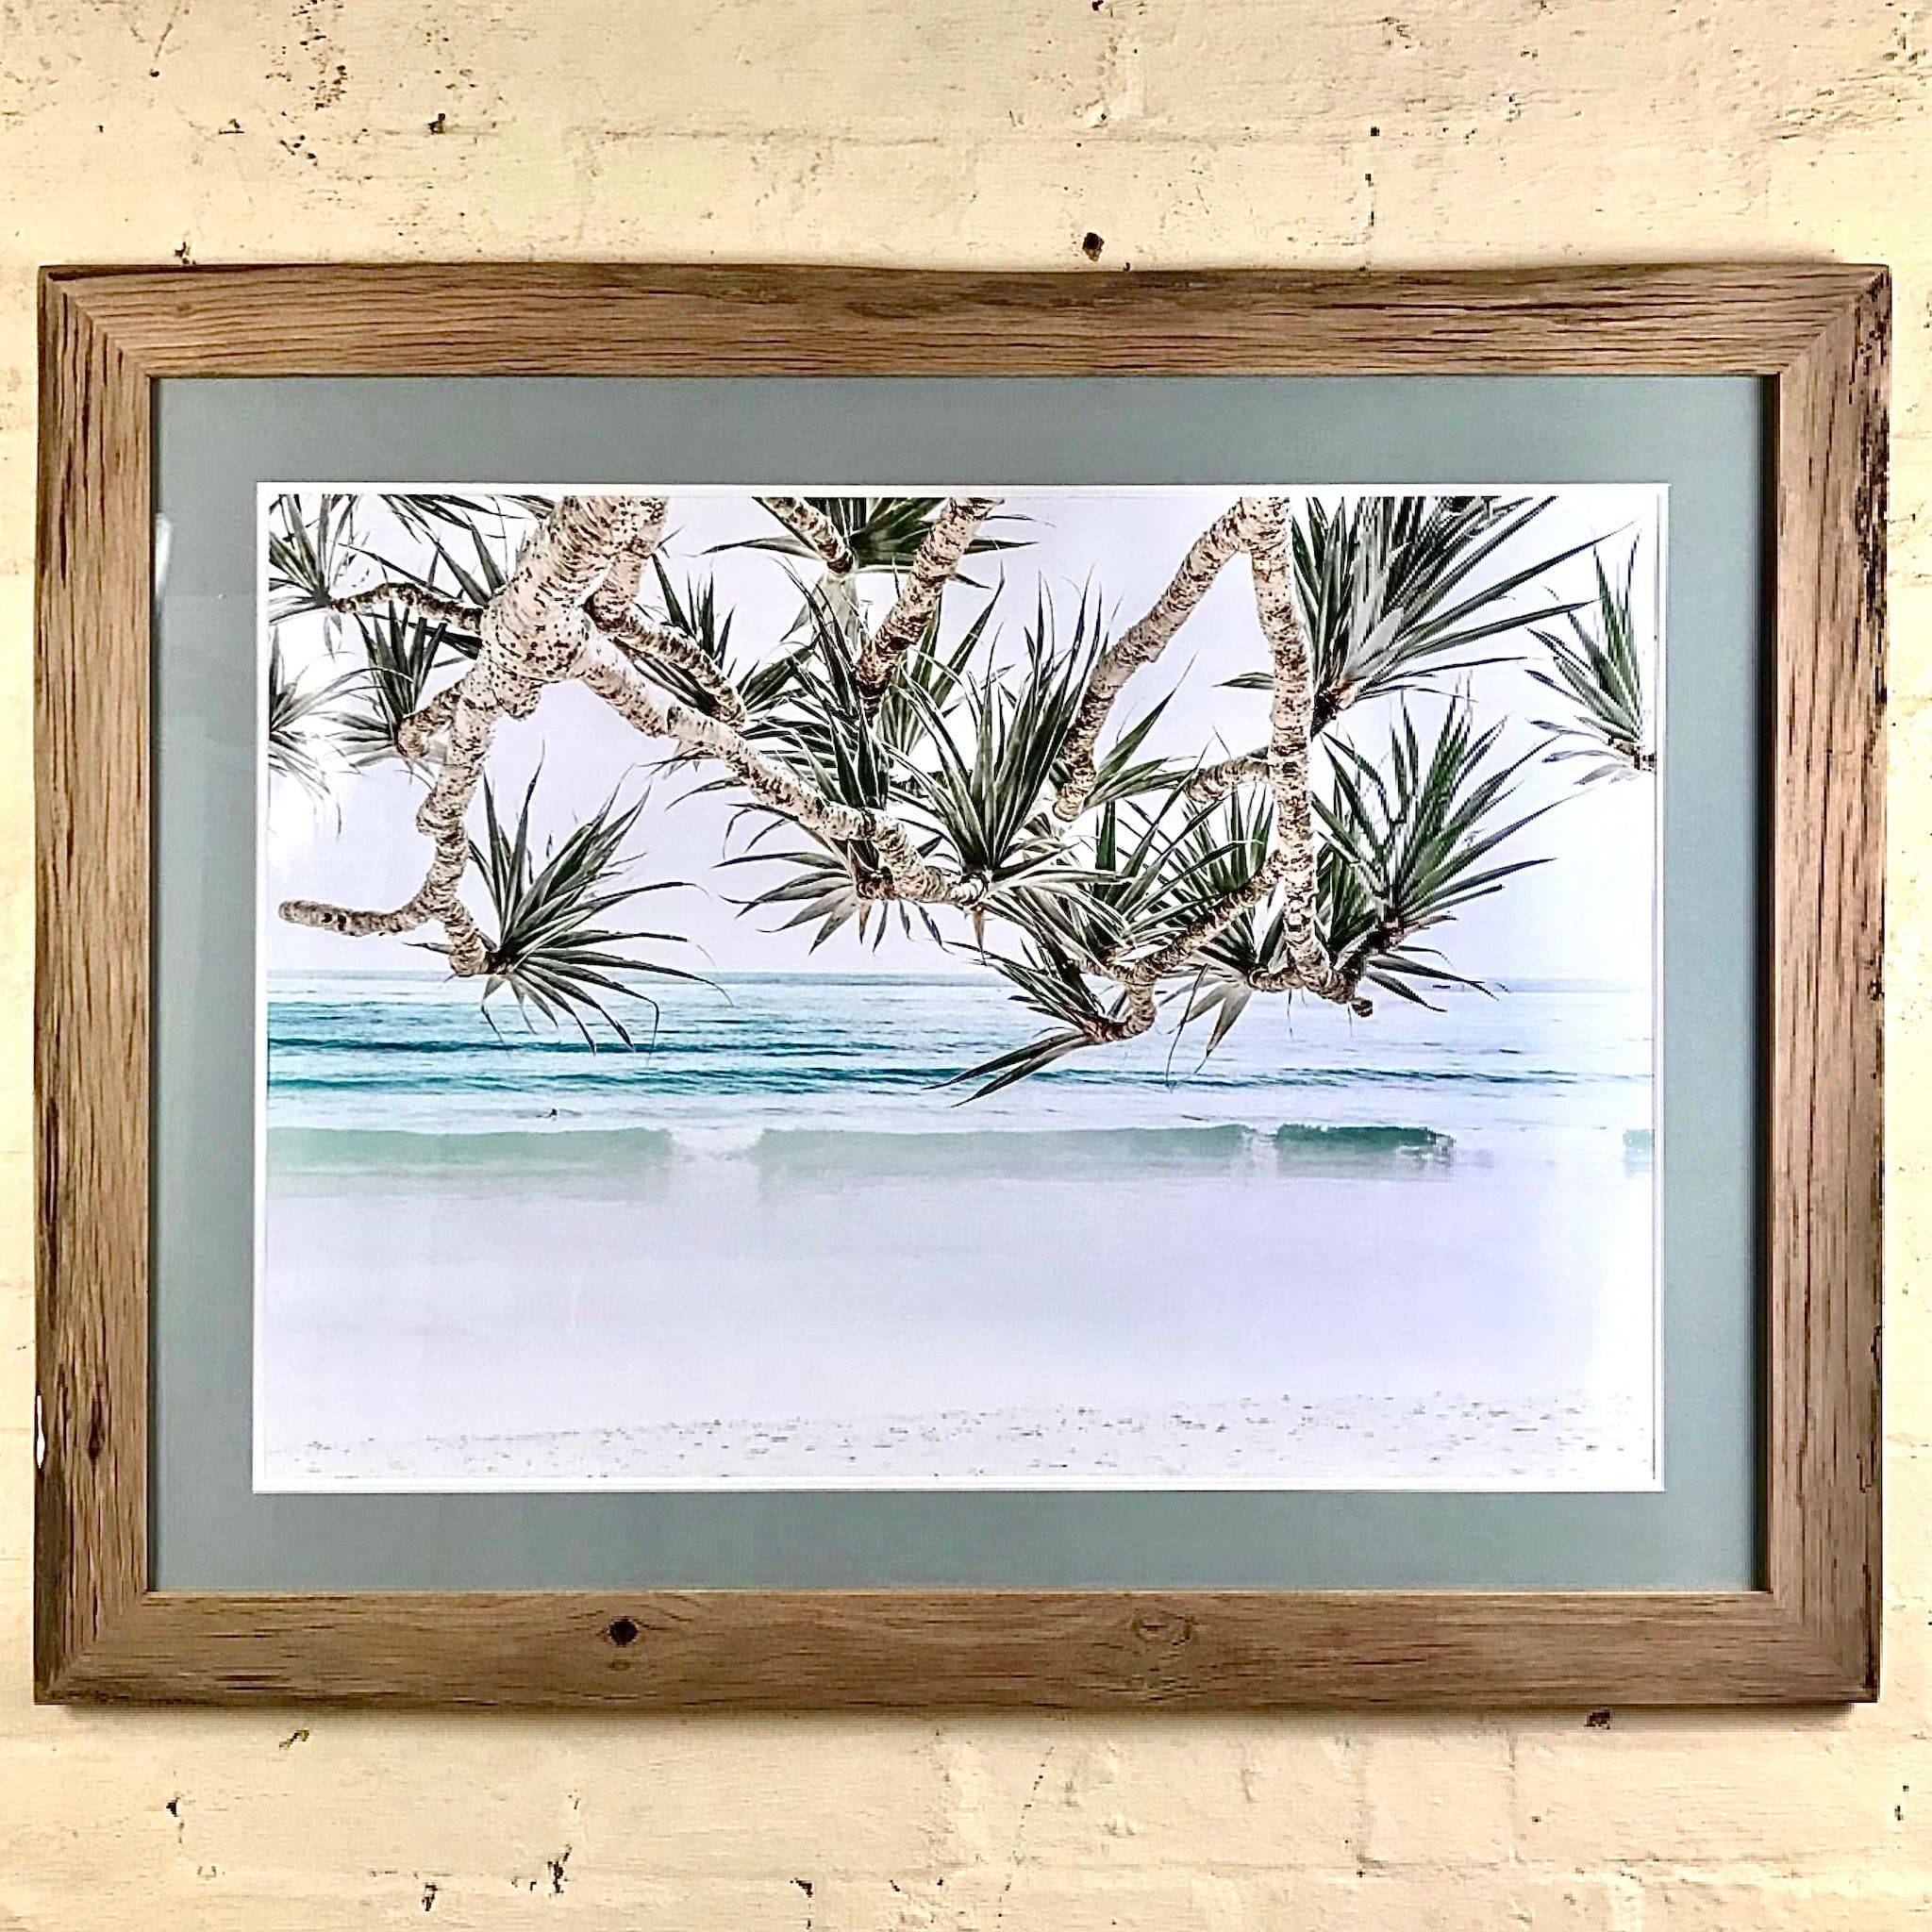 A driftwood clear wax wooden custom picture frame by Mulbury